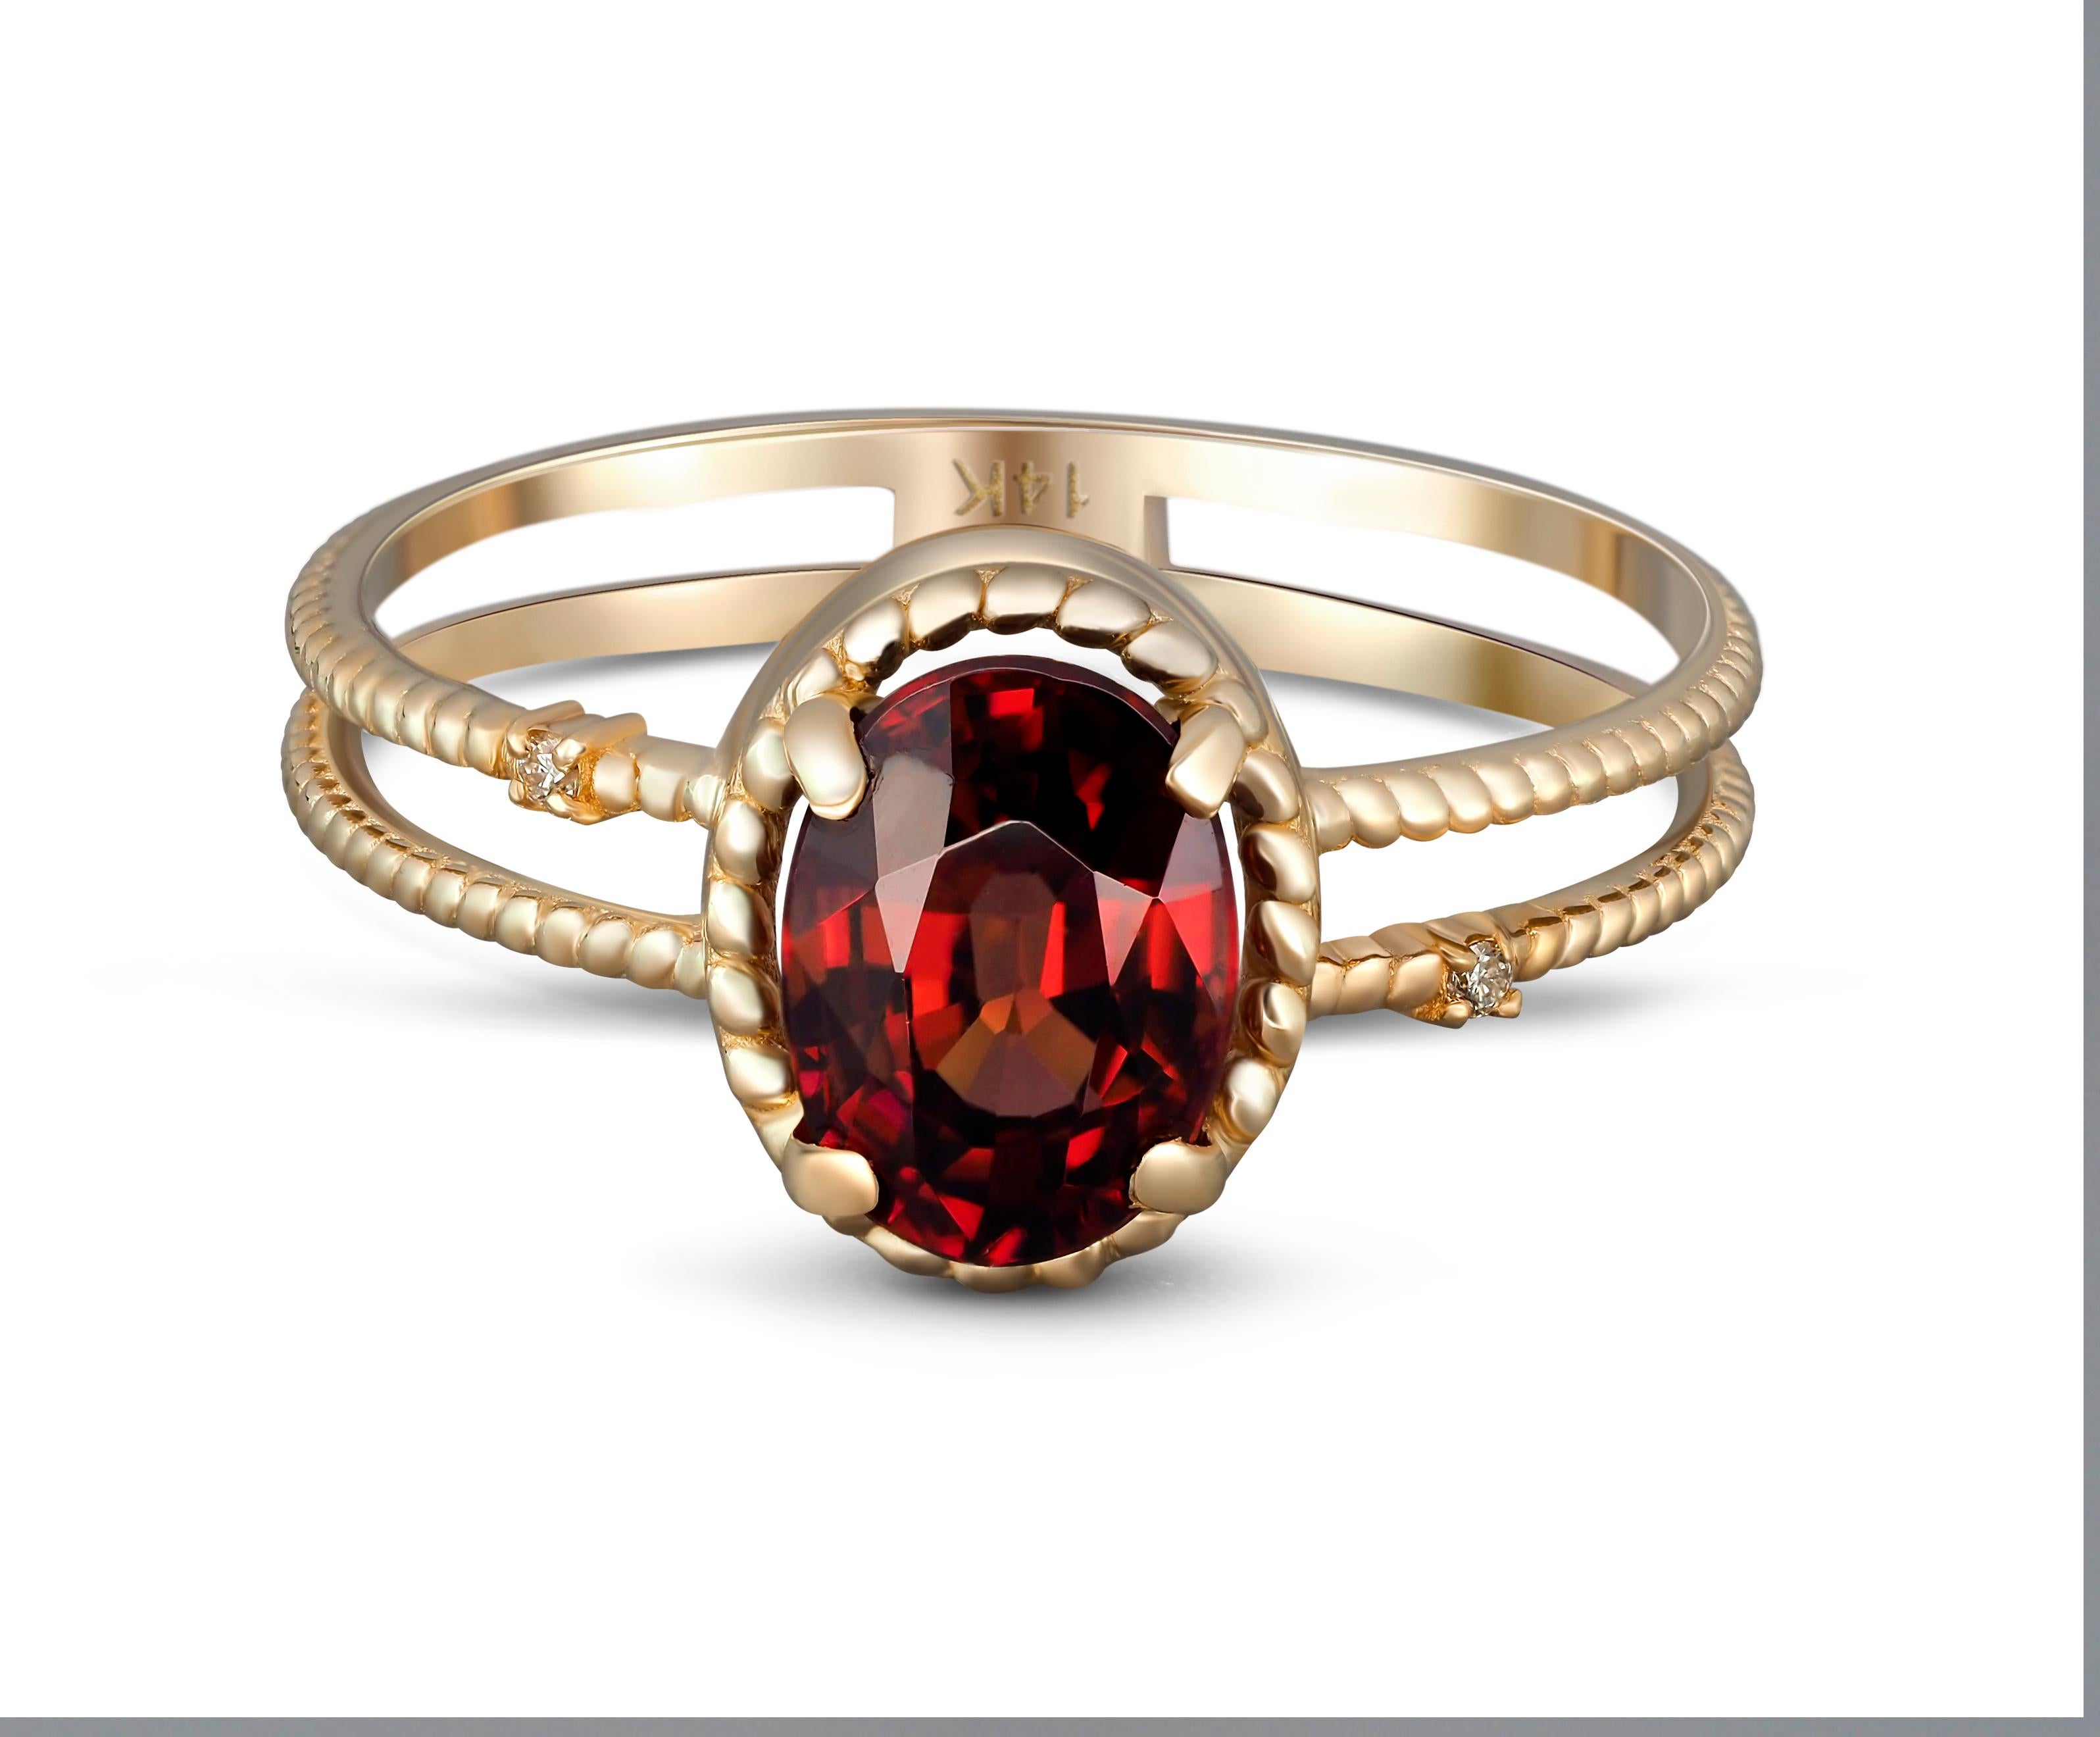 Metal: 14k gold
Weight: 1.8  g. depends from size.

Central stone: Natural garnet
Weight -  approx 0.80 ct in total, oval cut.
Clarity: Transparent with inclusions, color -   red.

Surrounding stones:
Diamonds: G/Vs, round brilliant cut, 2x0.01=0.02